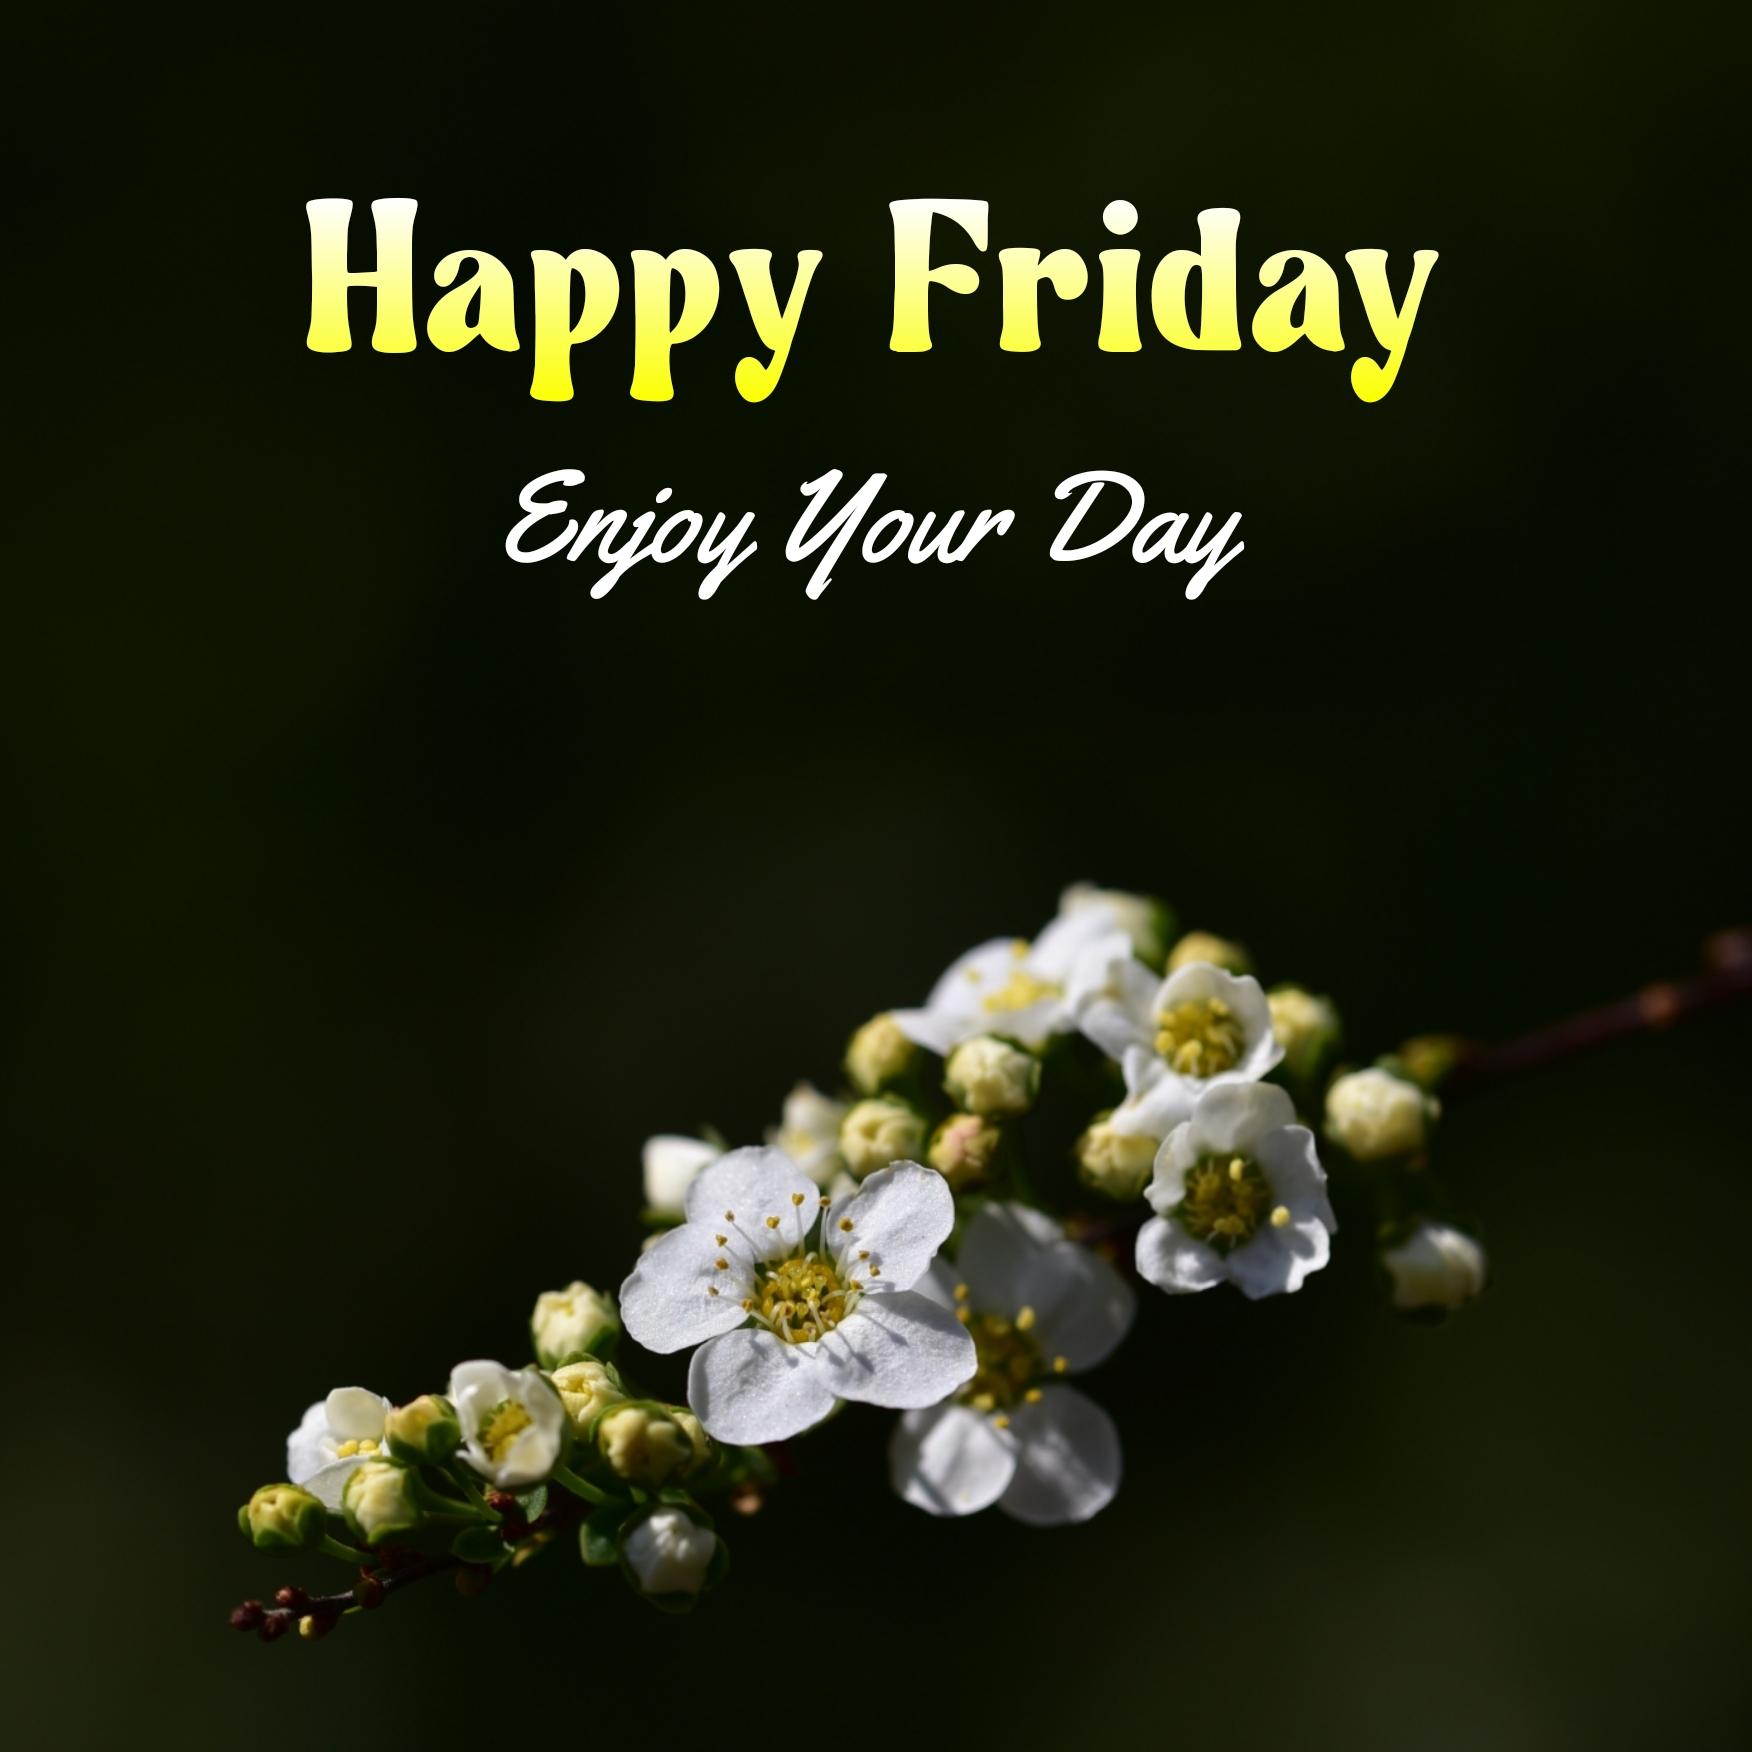 Happy Friday Enjoy Your Day Images